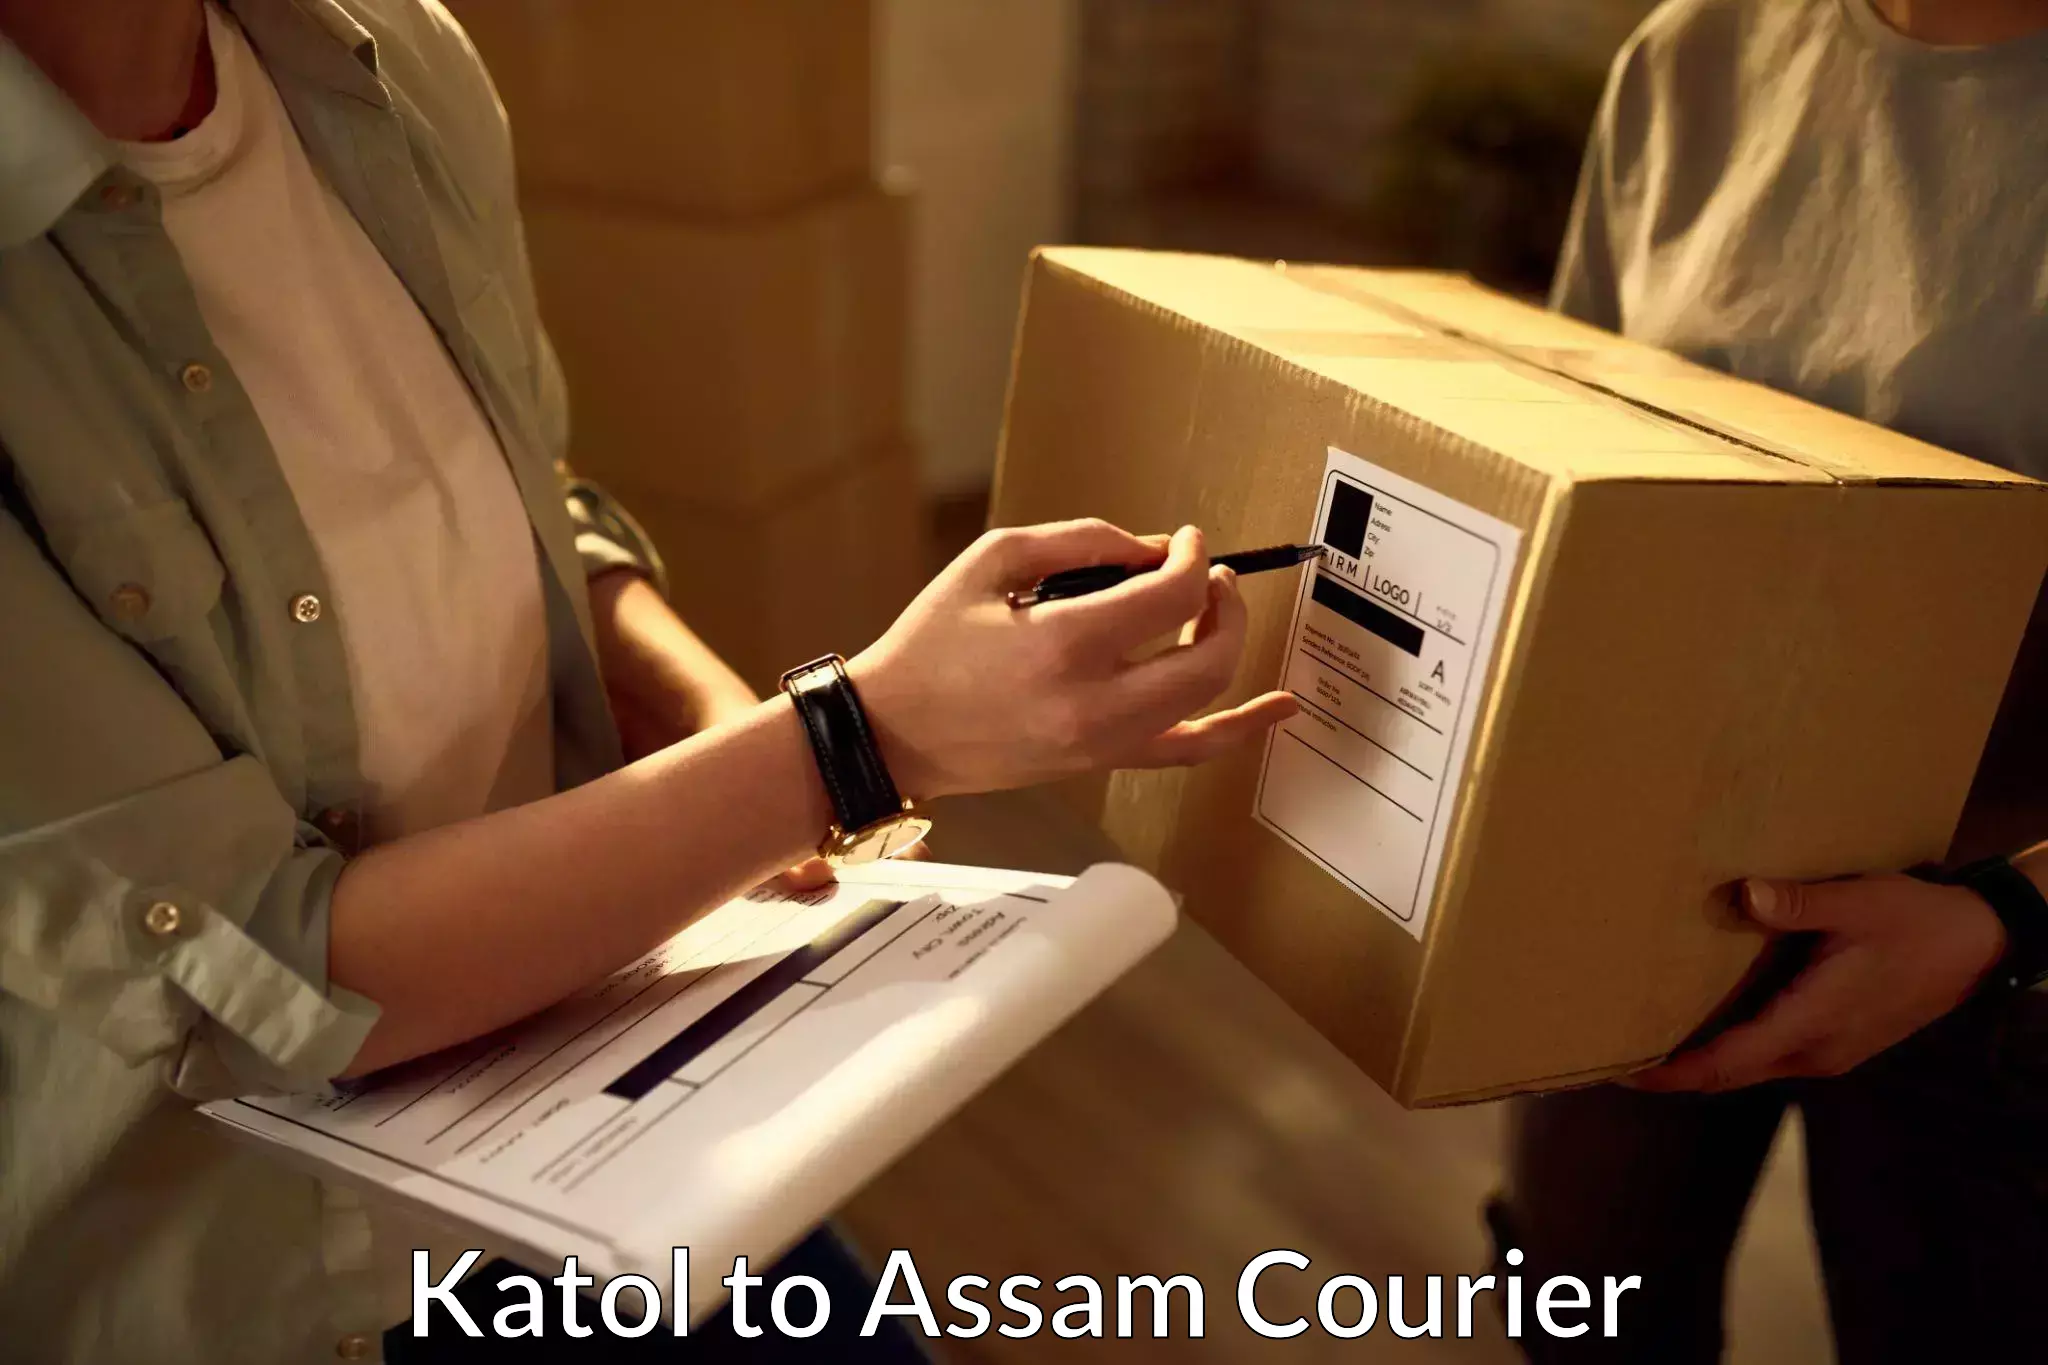 Global courier networks Katol to Assam